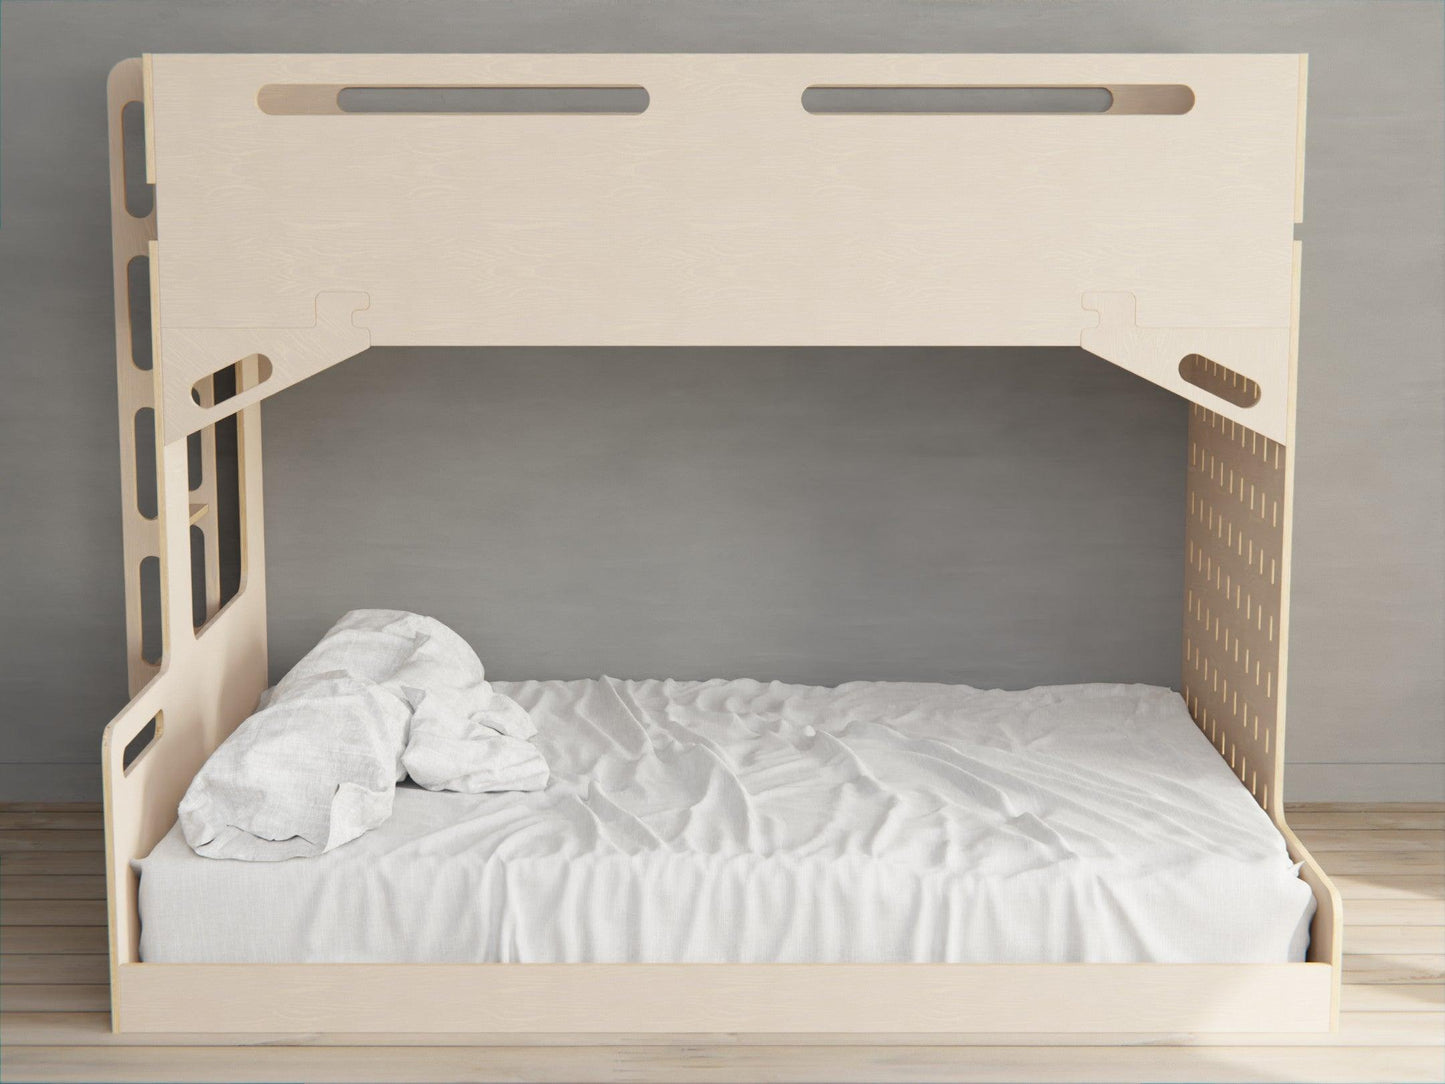 Upgrade your living with our triple bunk beds. Made from quality plywood, they're the ultimate space savers.